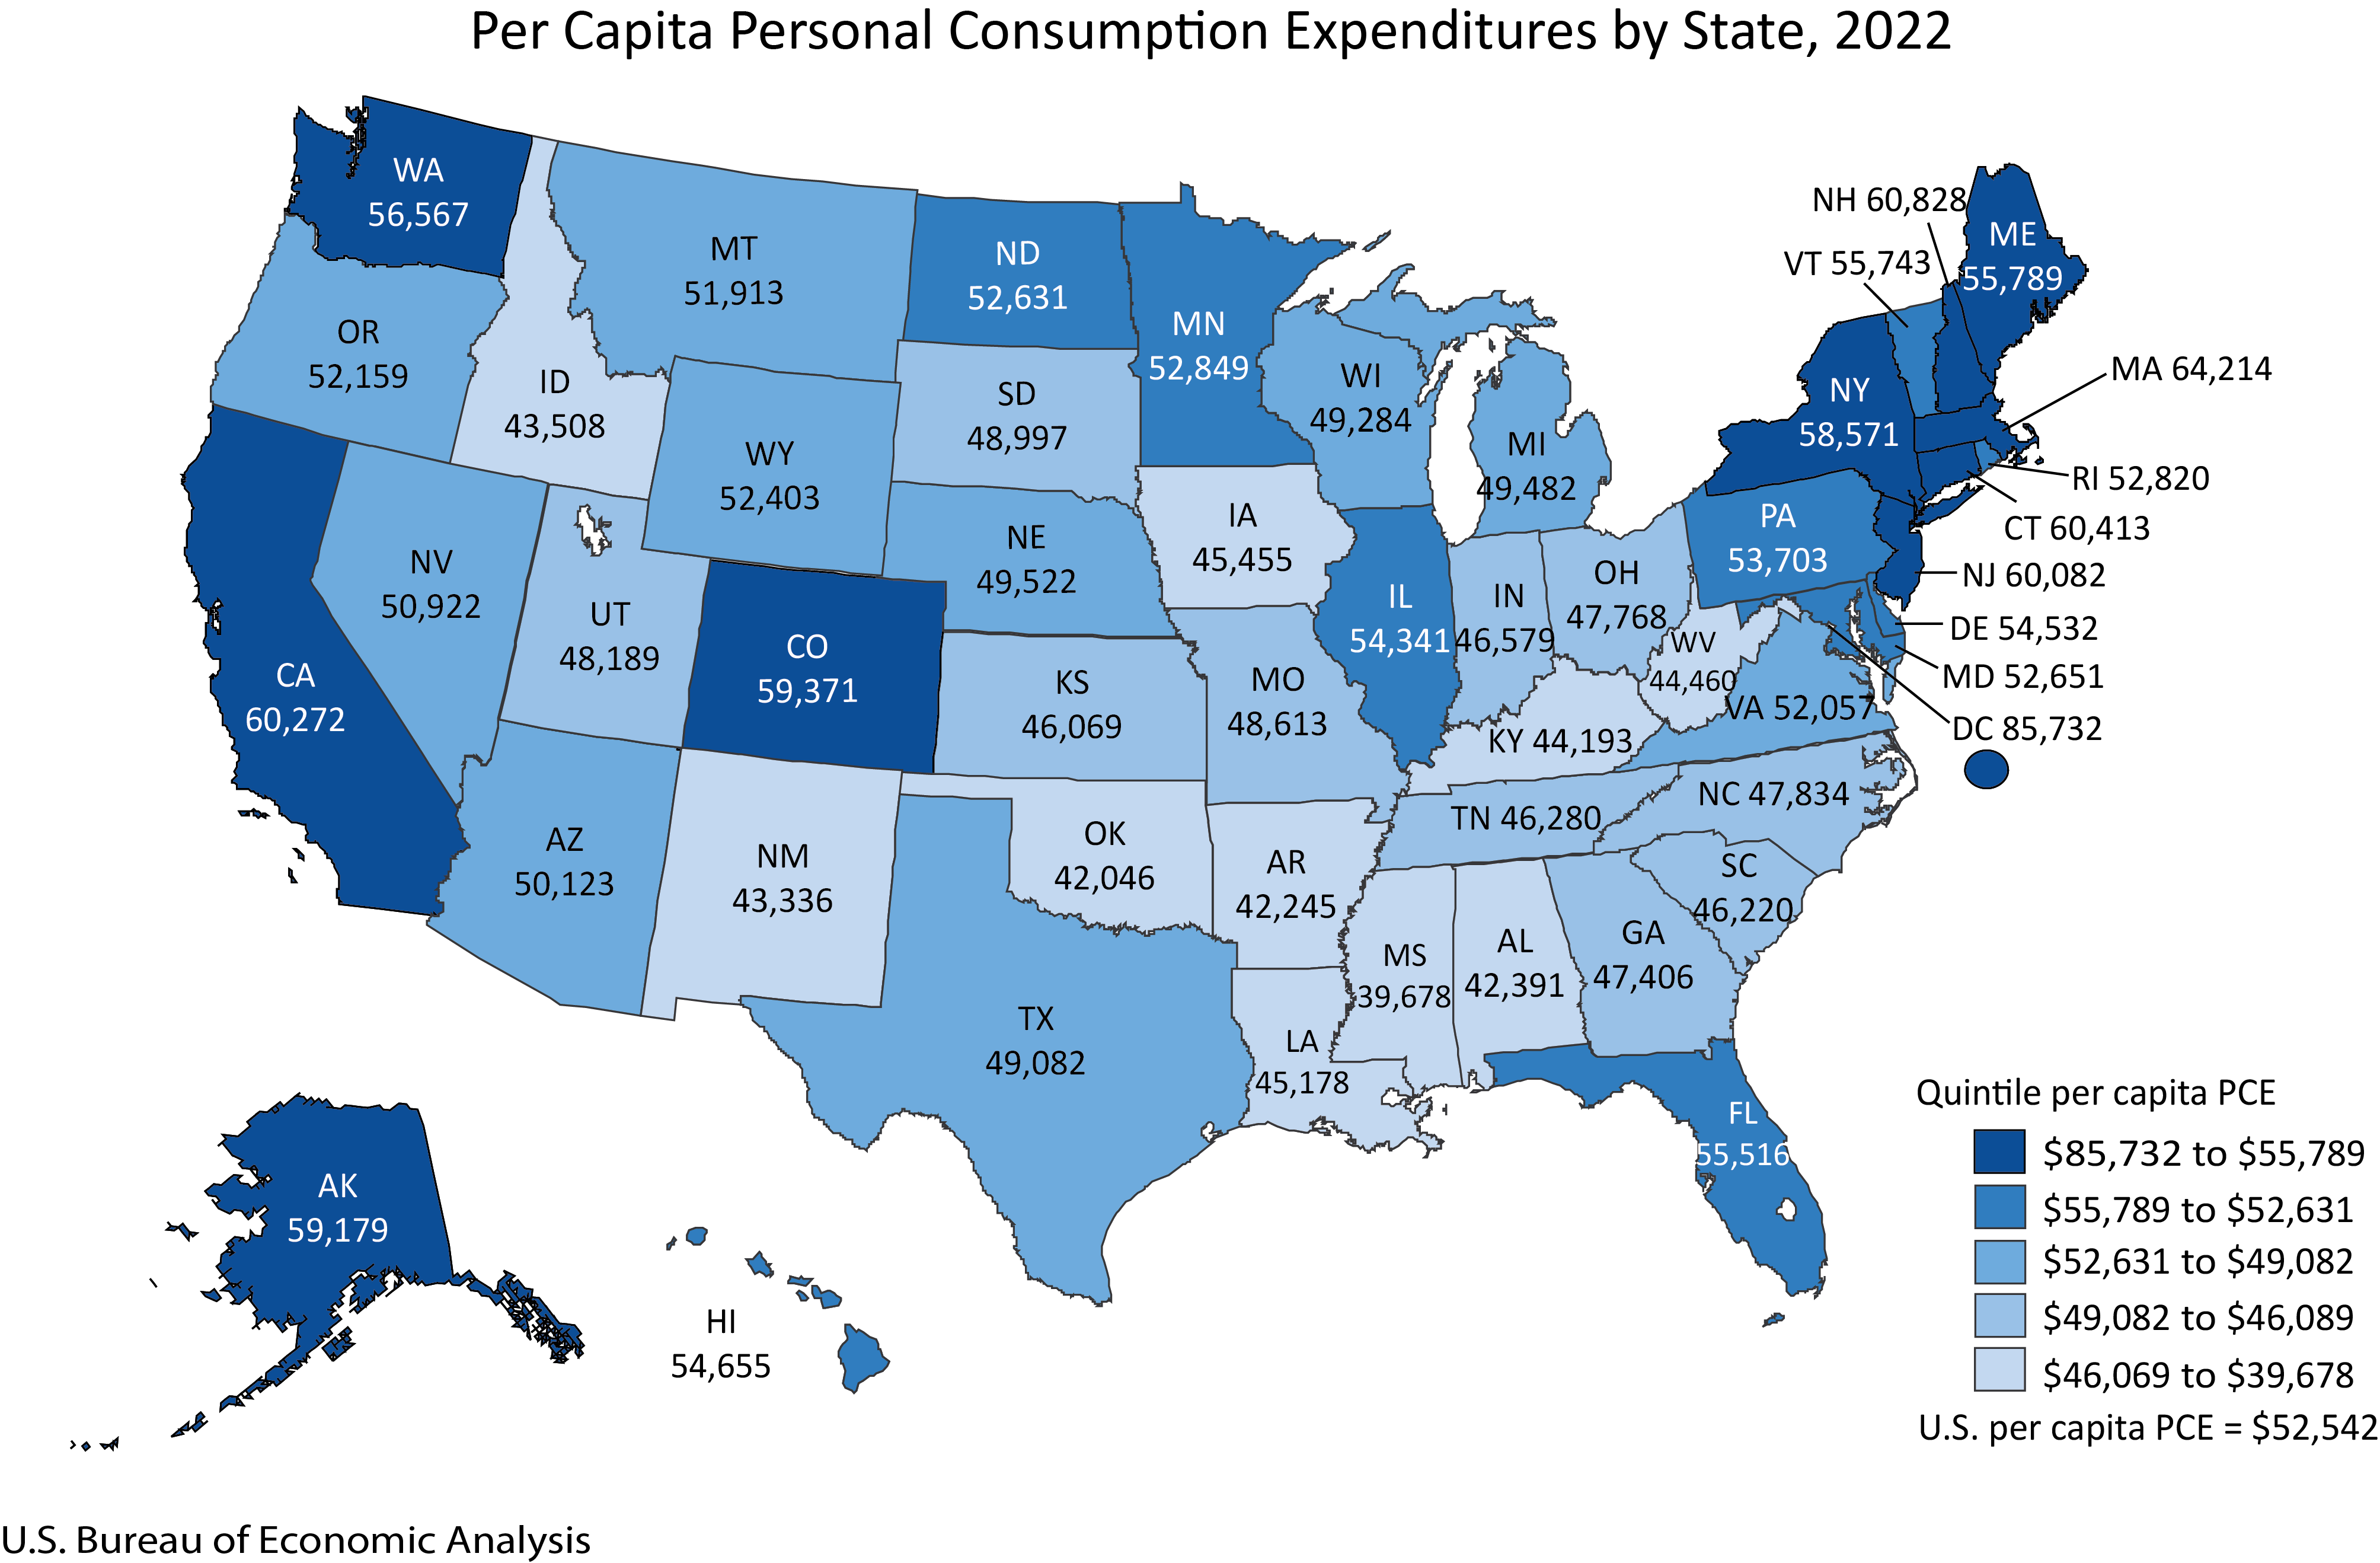 Per Capita Personal Consumption Expenditures by State, 2022